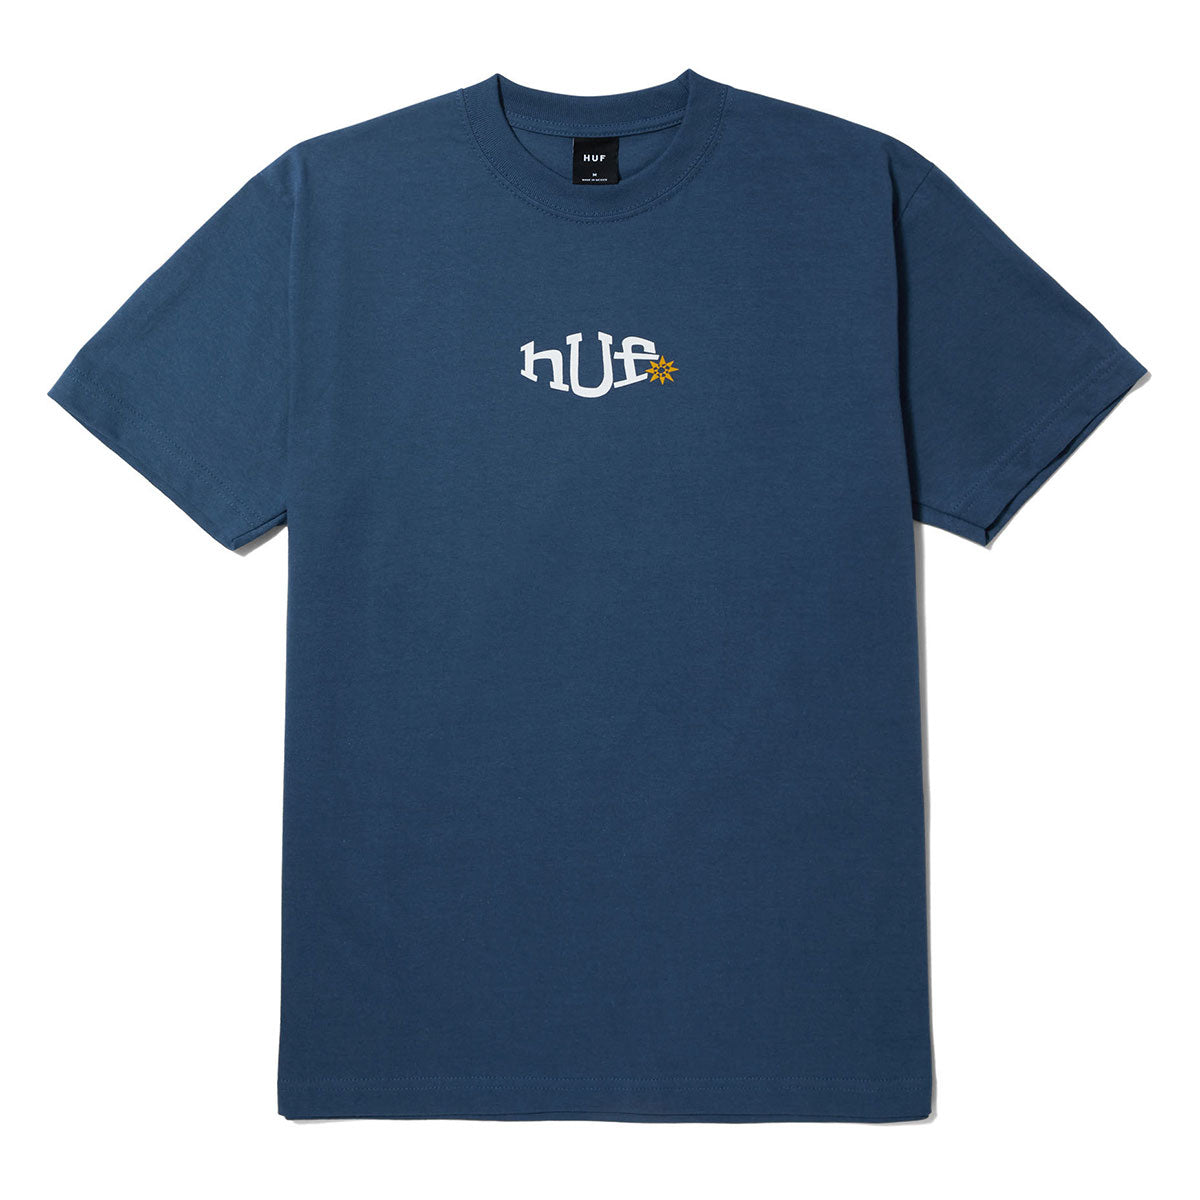 HUF Jazzy Grooves T-Shirt - Slate Blue image 2